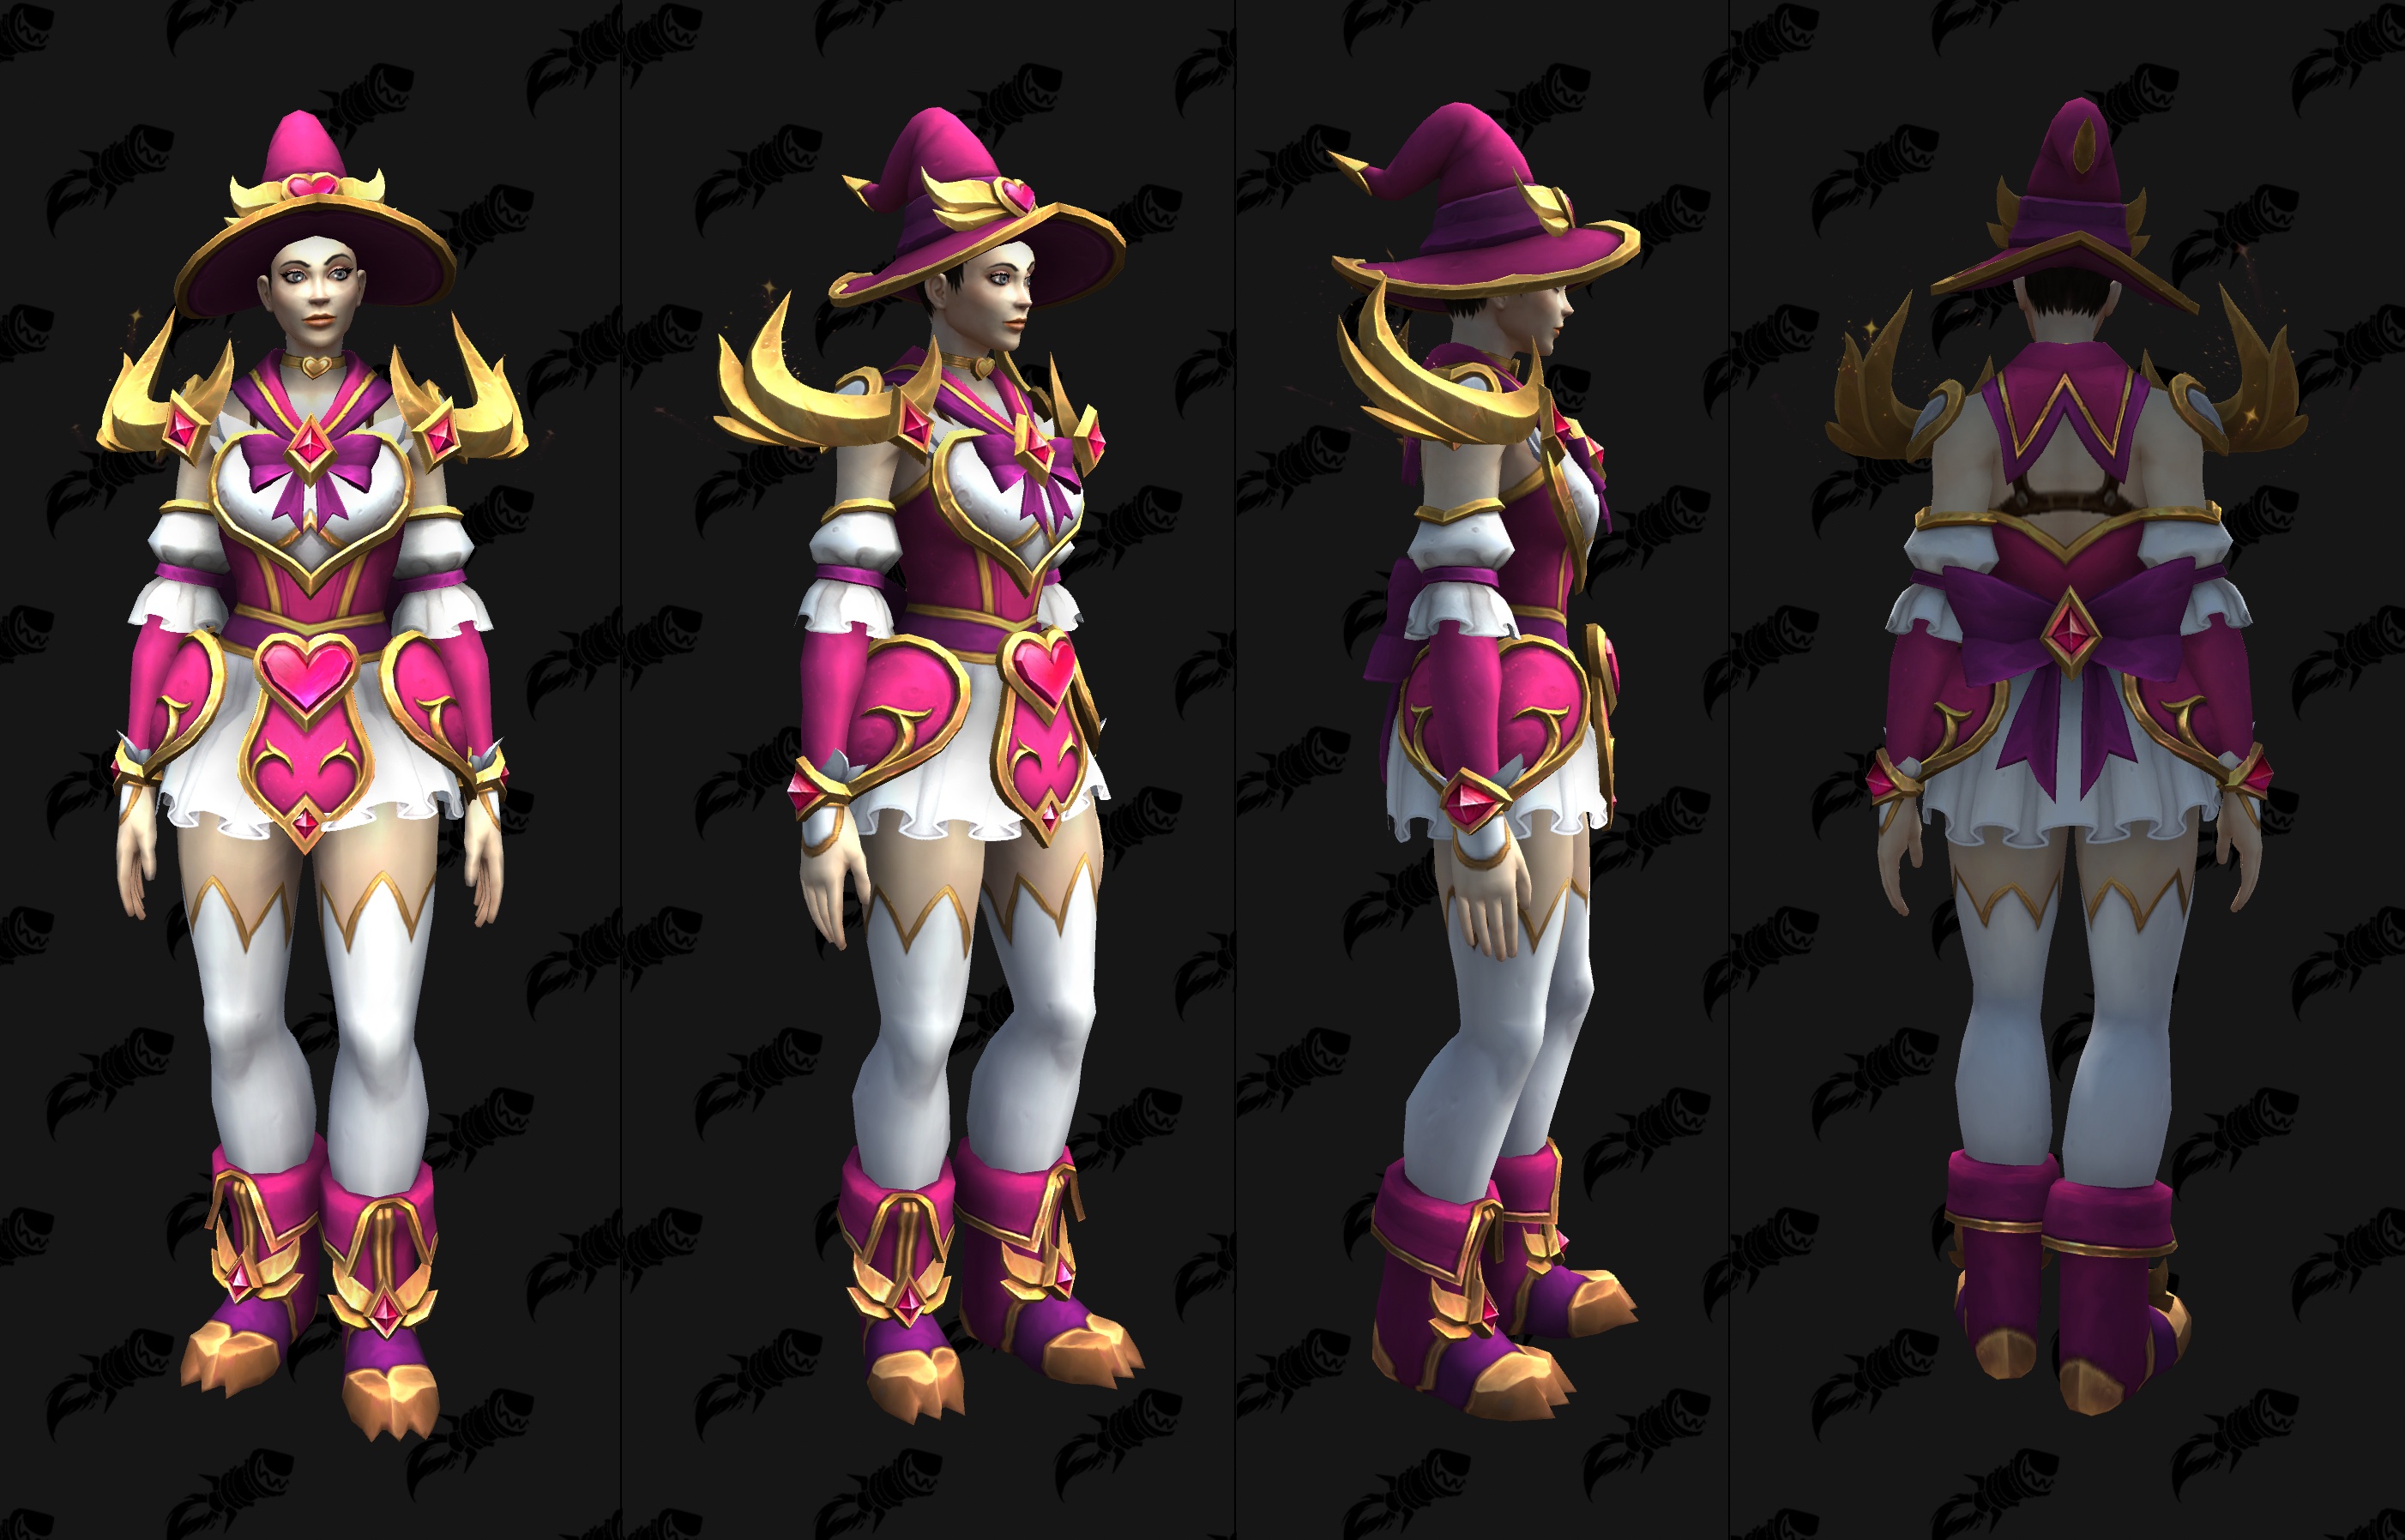 New Love is in the Air items General Discussion World of Warcraft